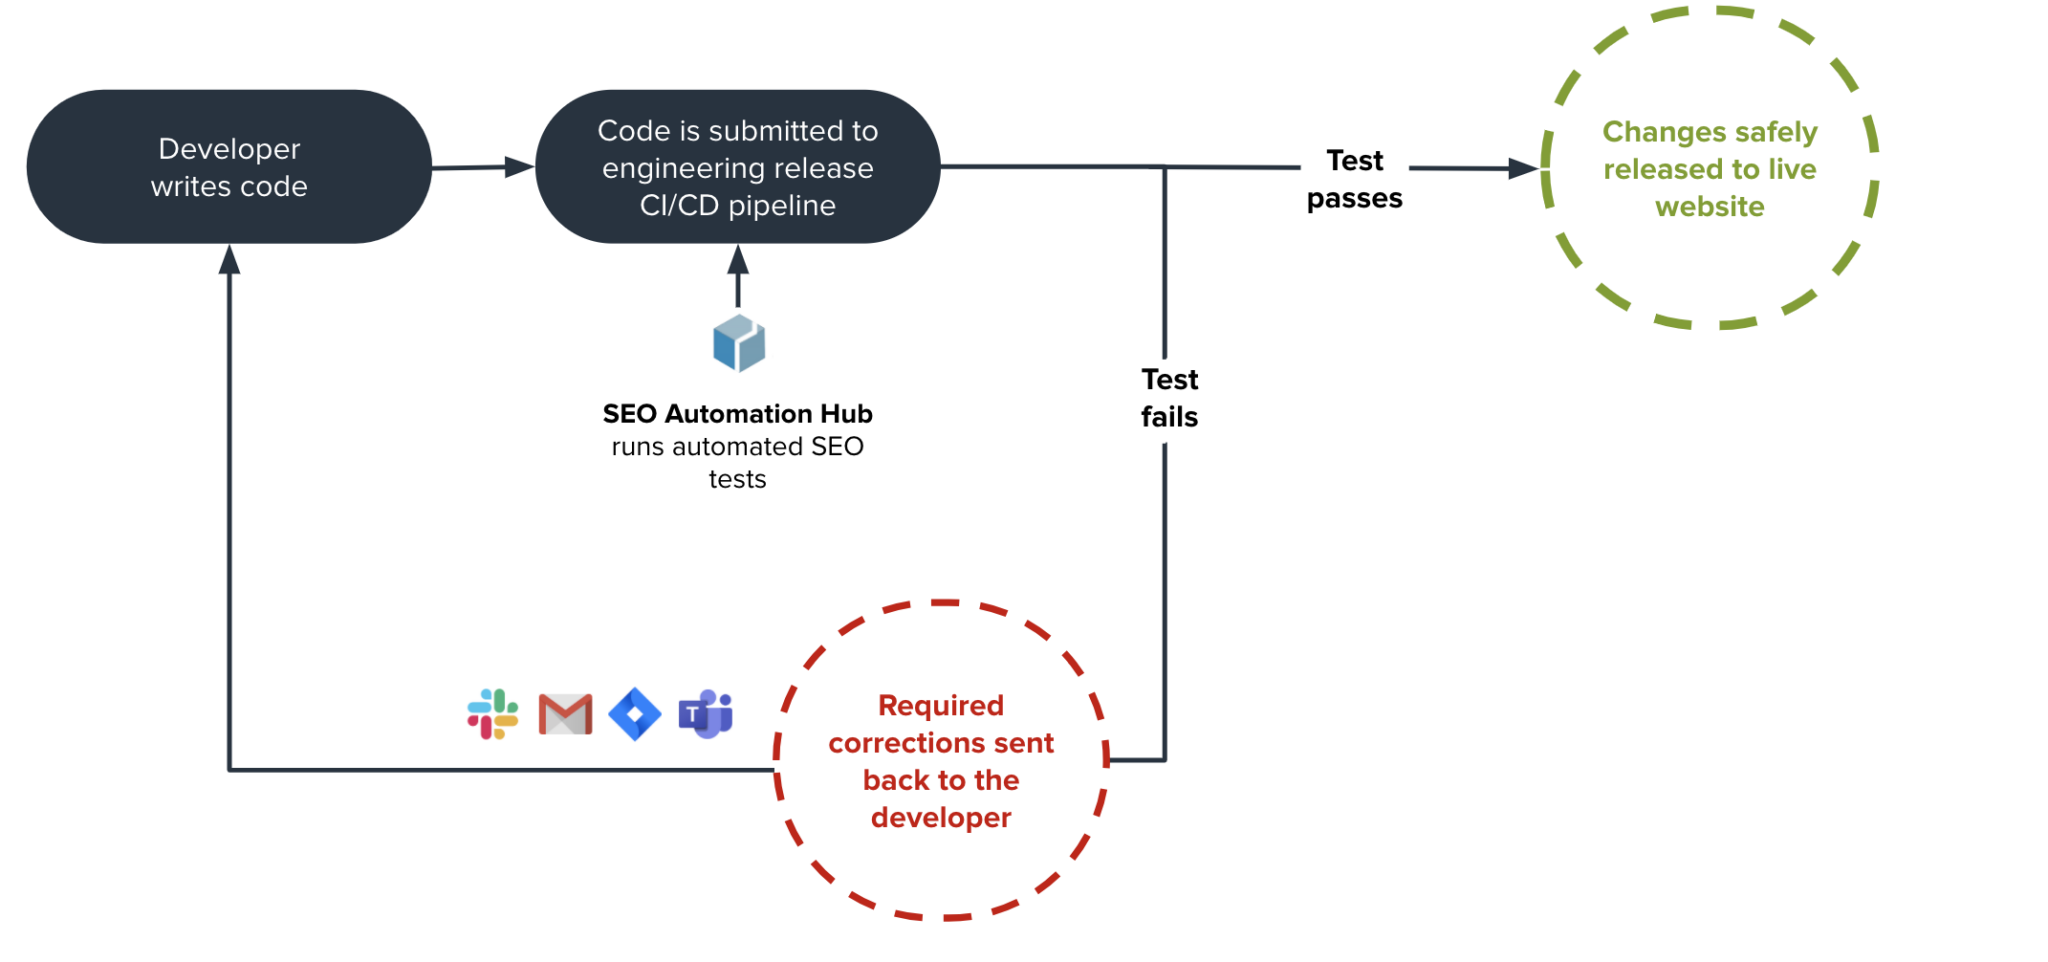 slide showing how SEO testing is more efficient using DeepCrawl's SEO automation Hub